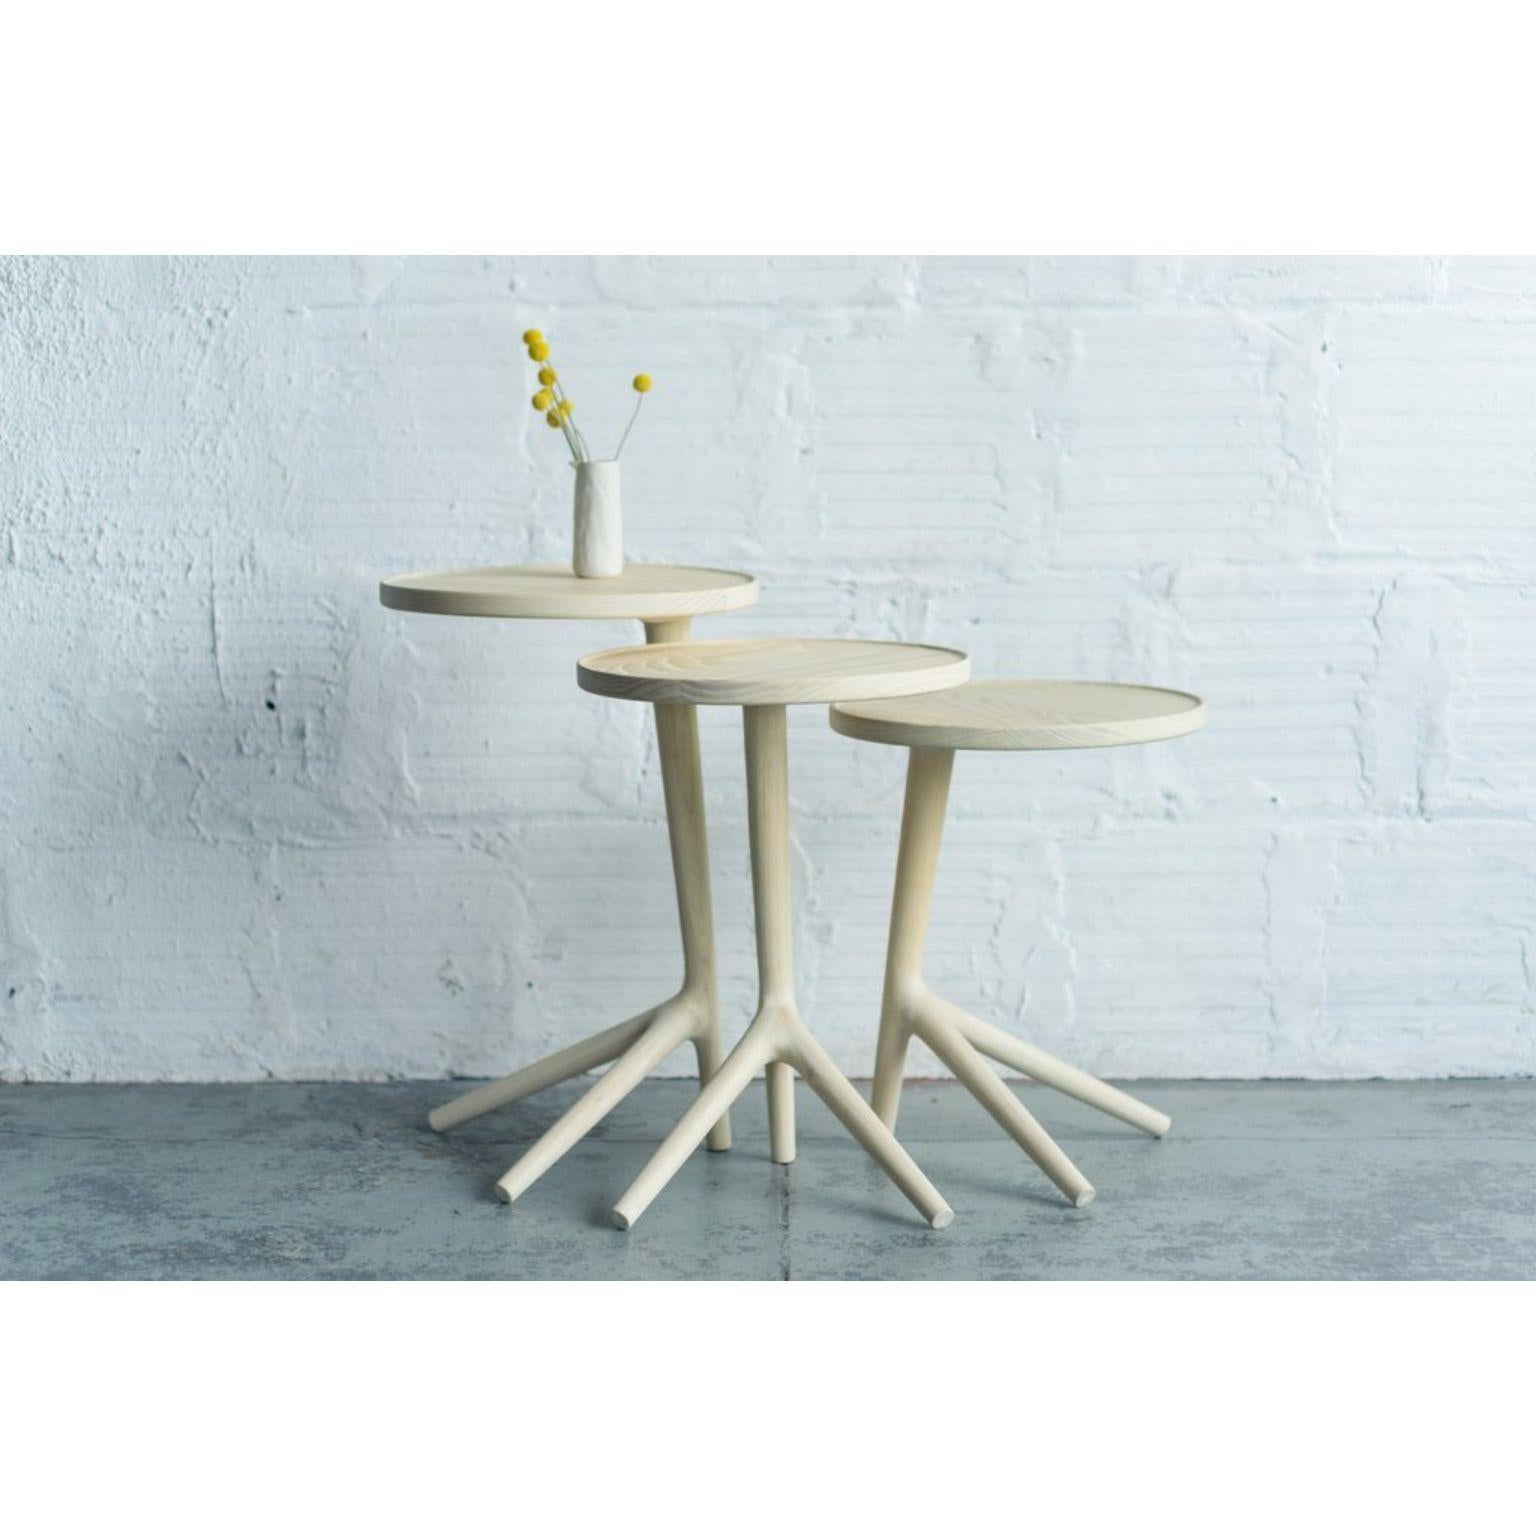 Set of 3 white ash tripod table by Fernweh Woodworking
Dimensions: 25 